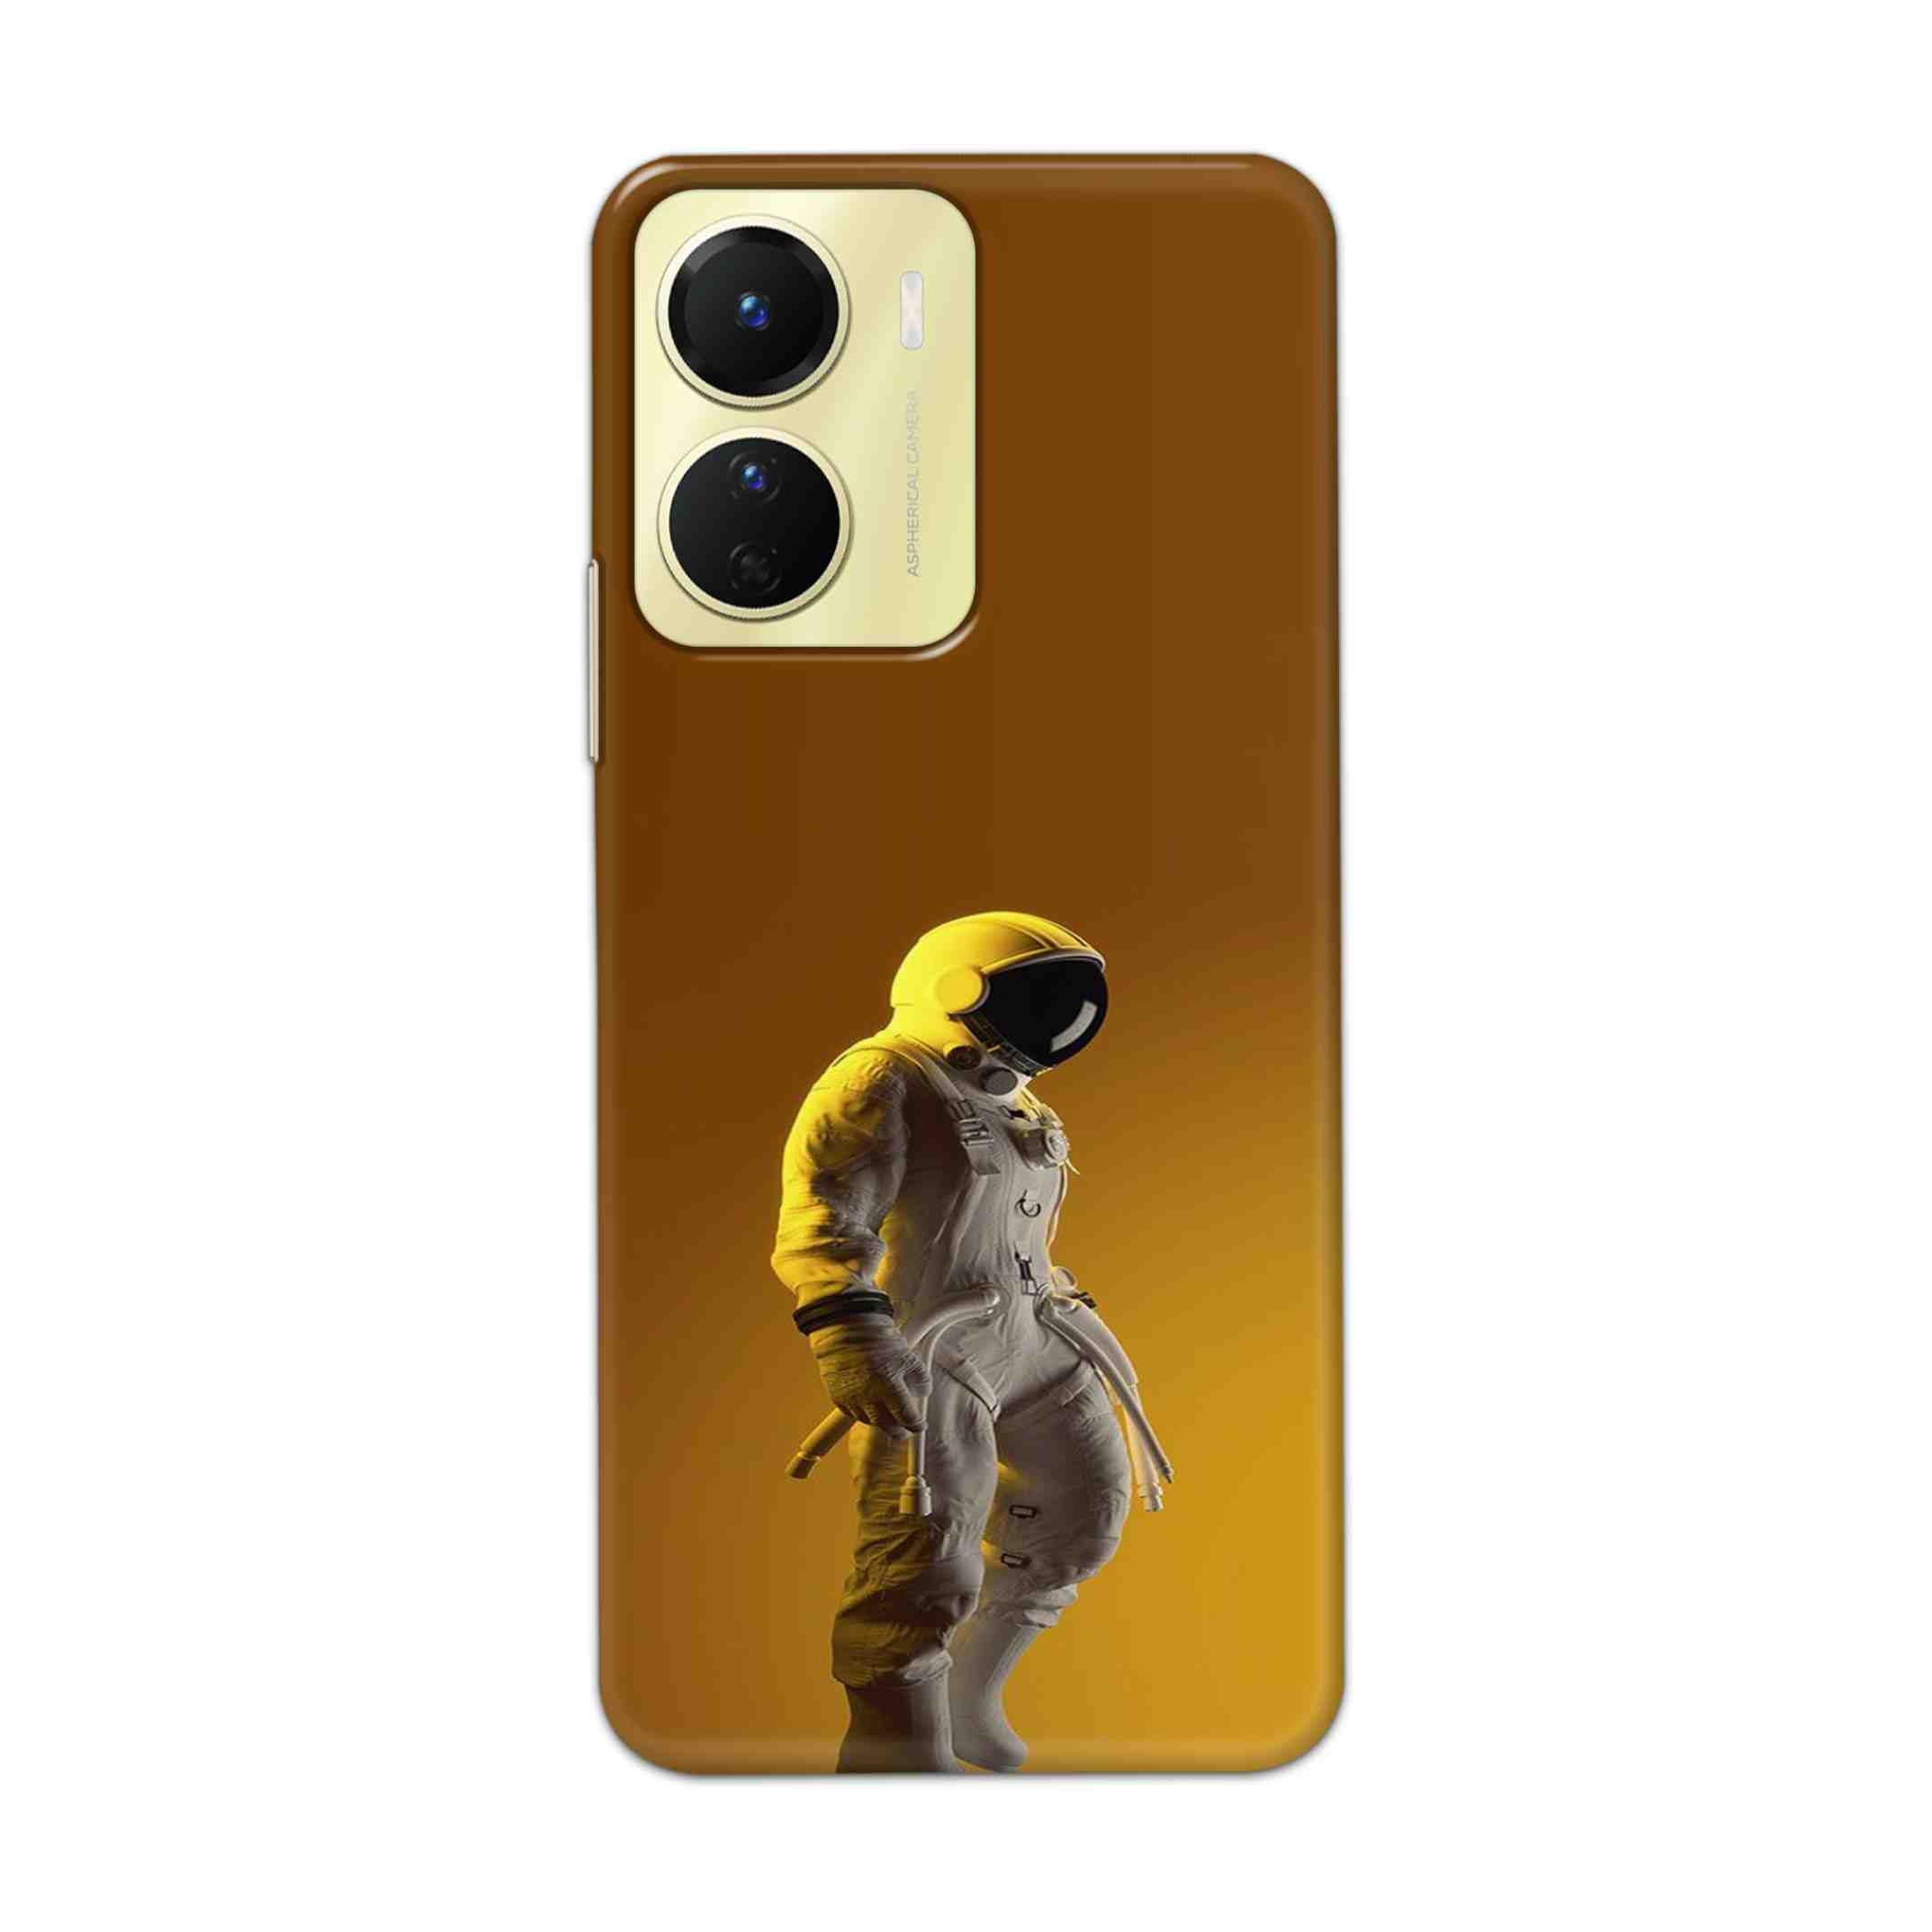 Buy Yellow Astronaut Hard Back Mobile Phone Case Cover For Vivo Y16 Online